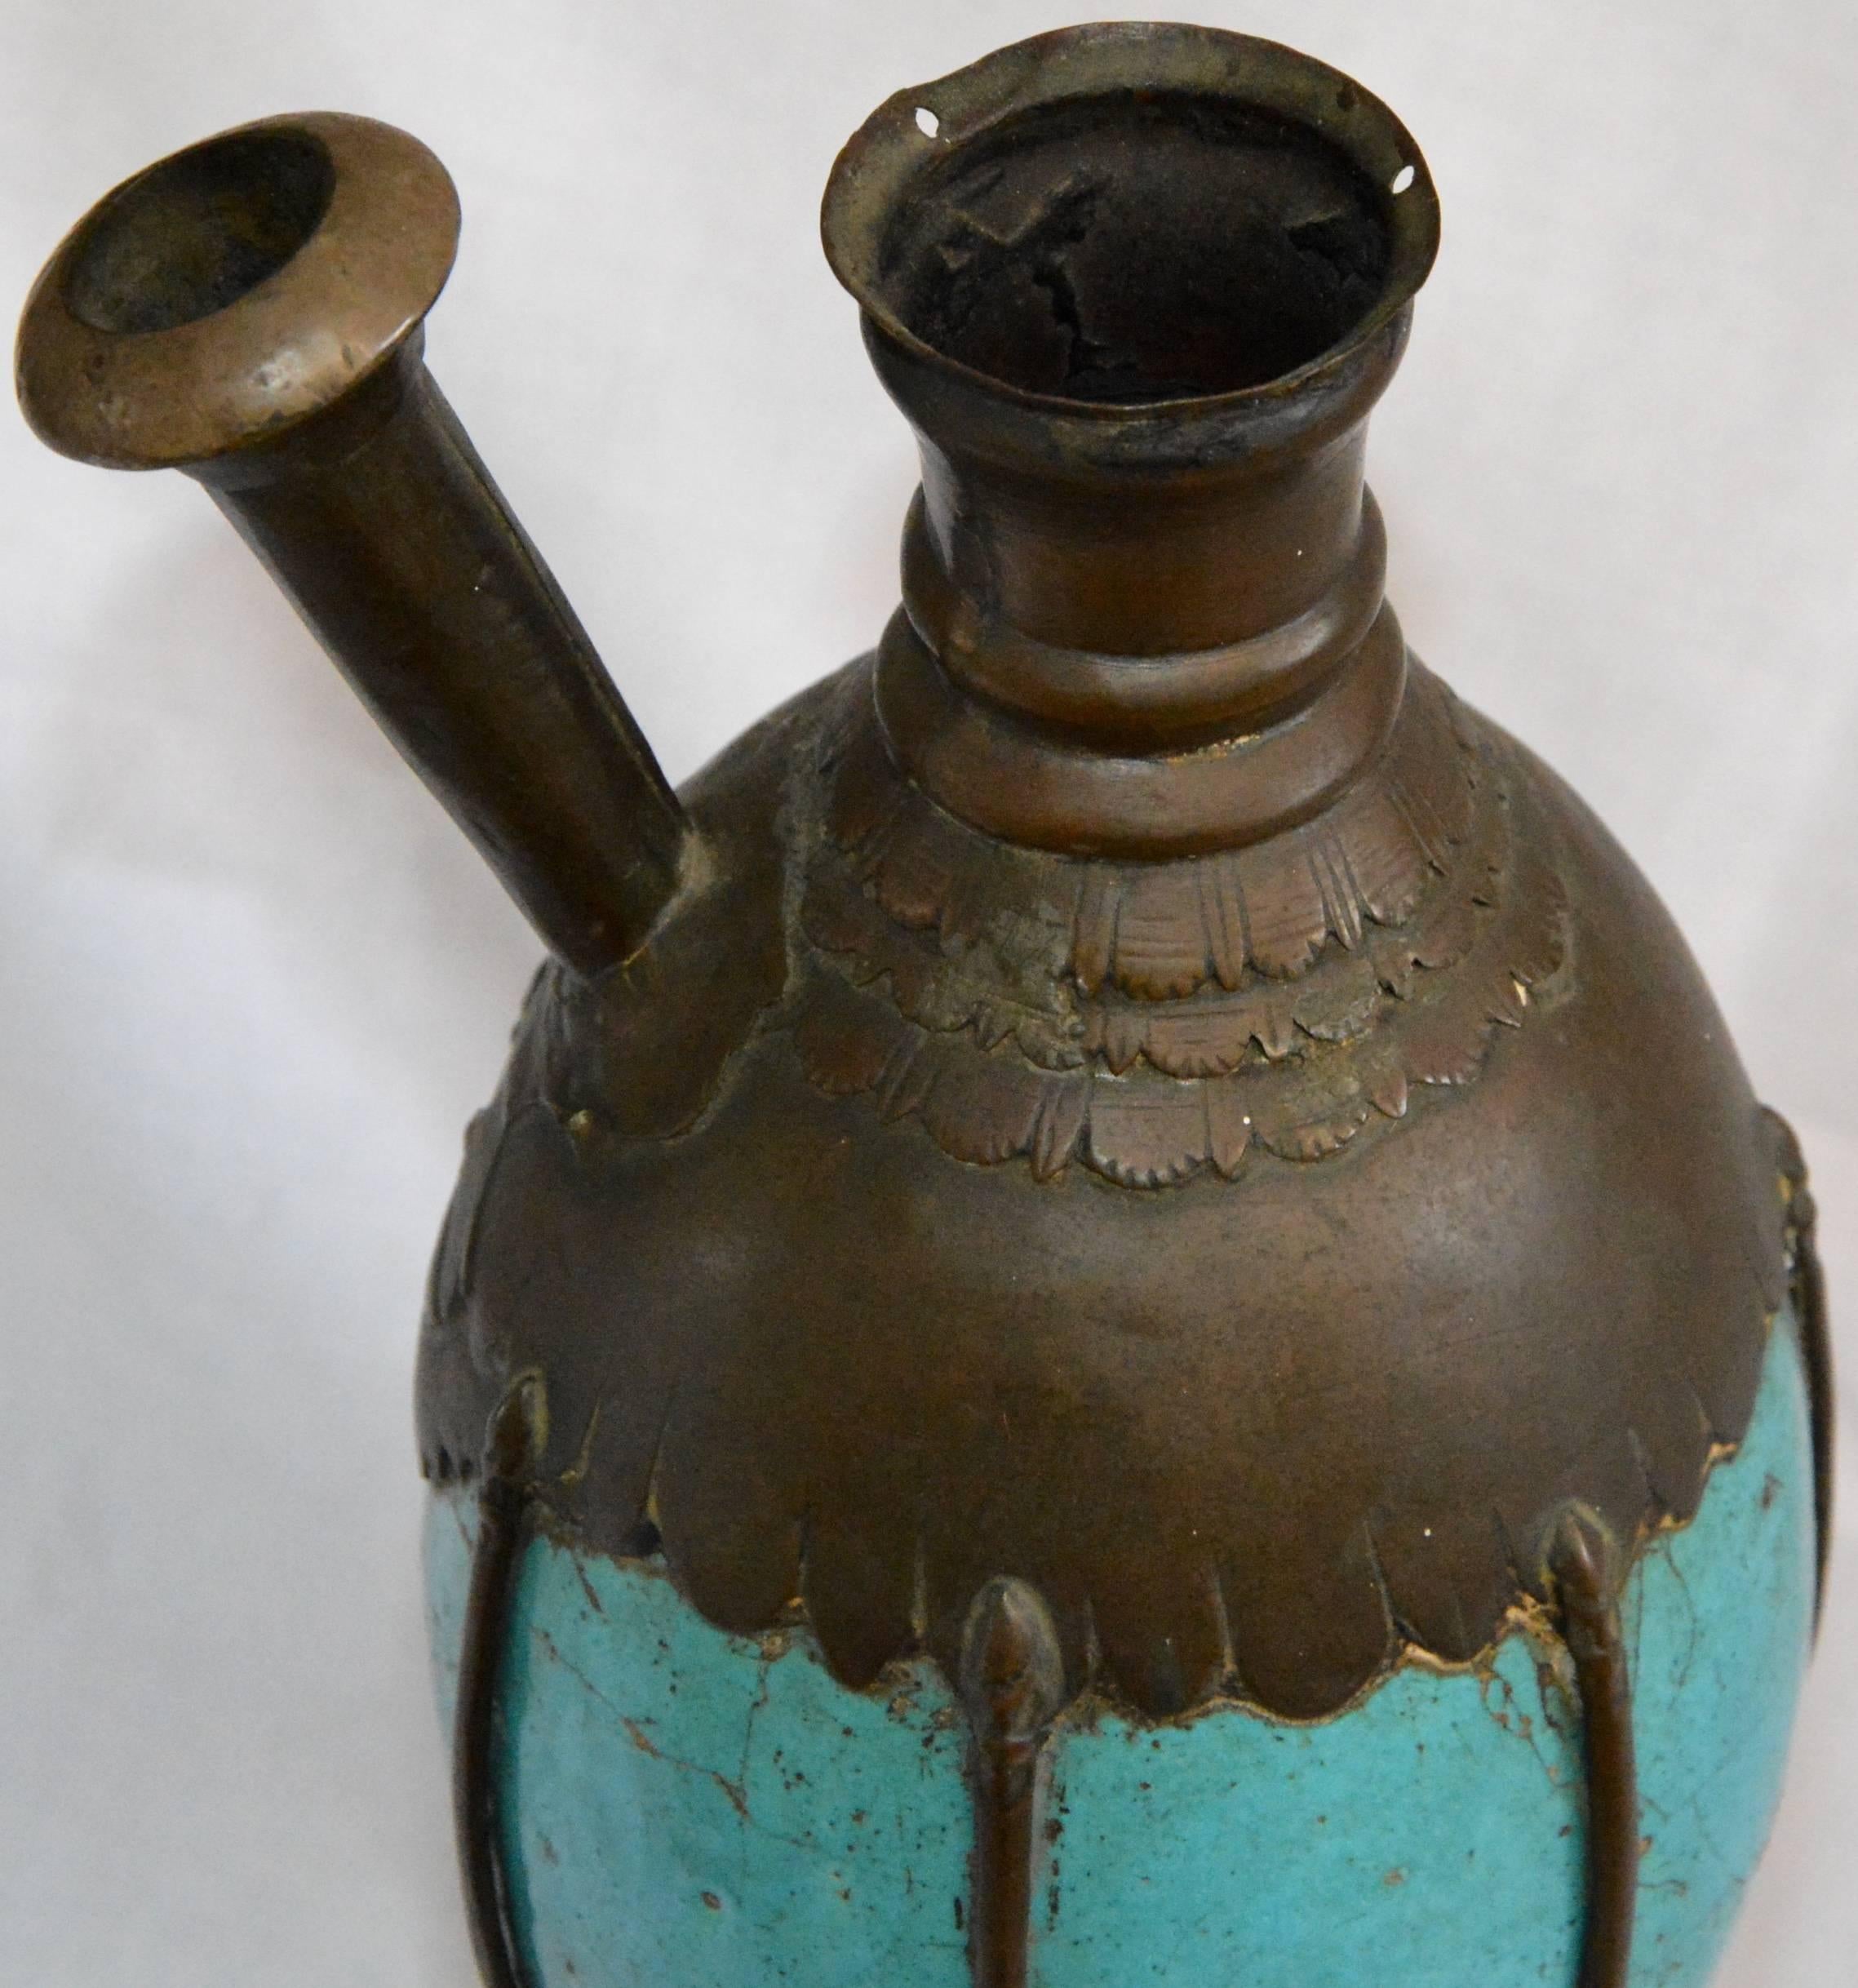 Featured is an ornate antique hookah. The hookah features a bronze metal body with a curved footed base and a turquoise blue ceramic center. The metal work has great details. This item is unmarked. It does not include a hose or bowl.